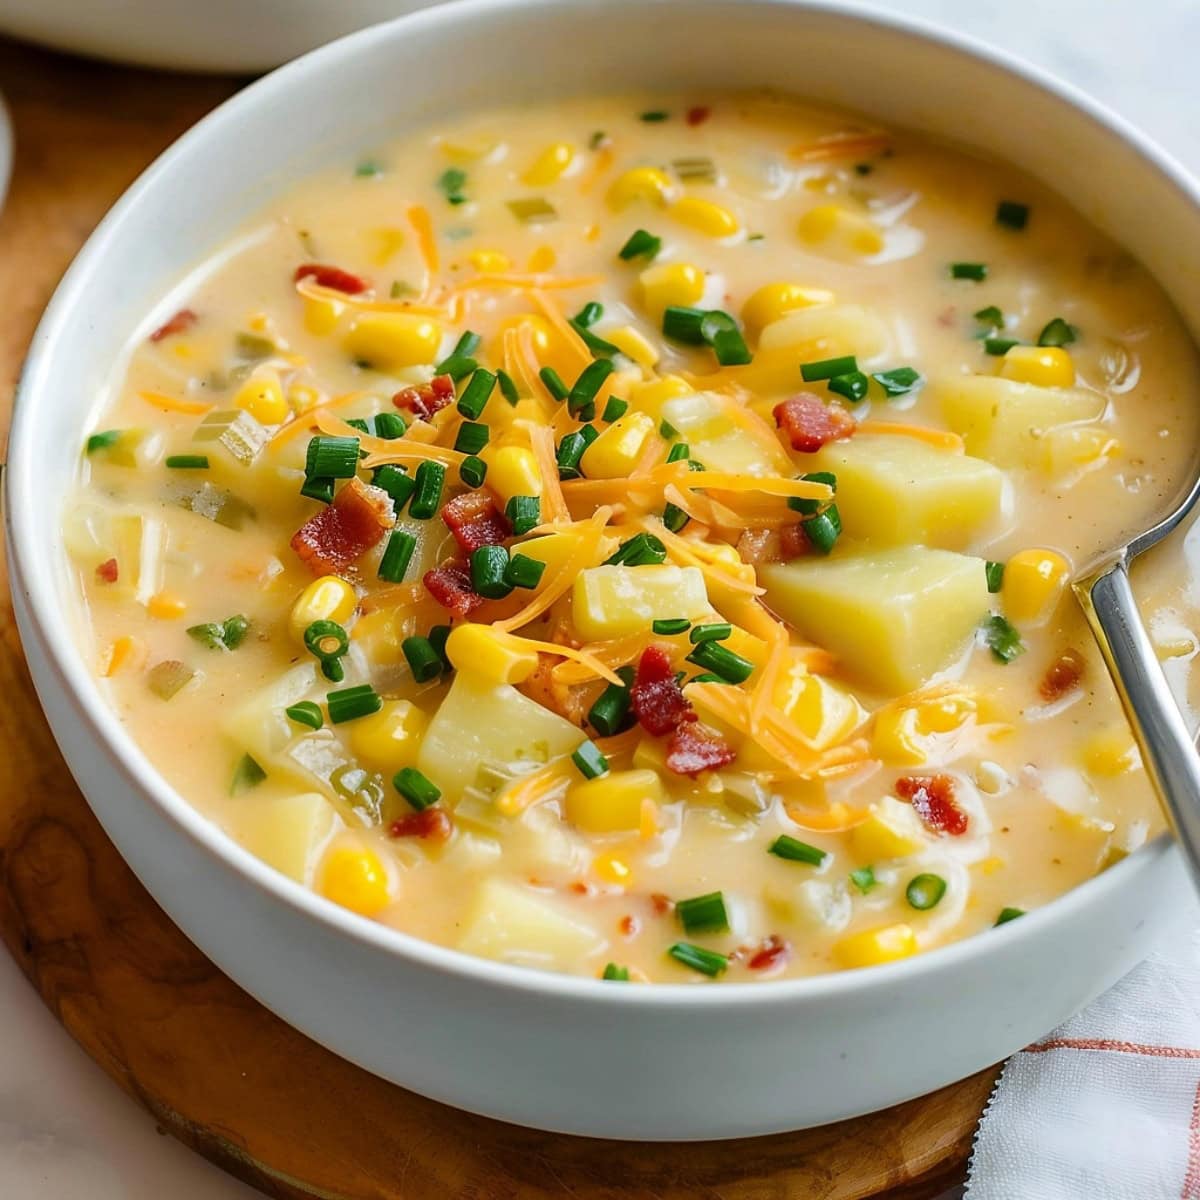 Thick and creamy corn chowder, served in a bowl and garnished with chopped chives and shredded cheese.